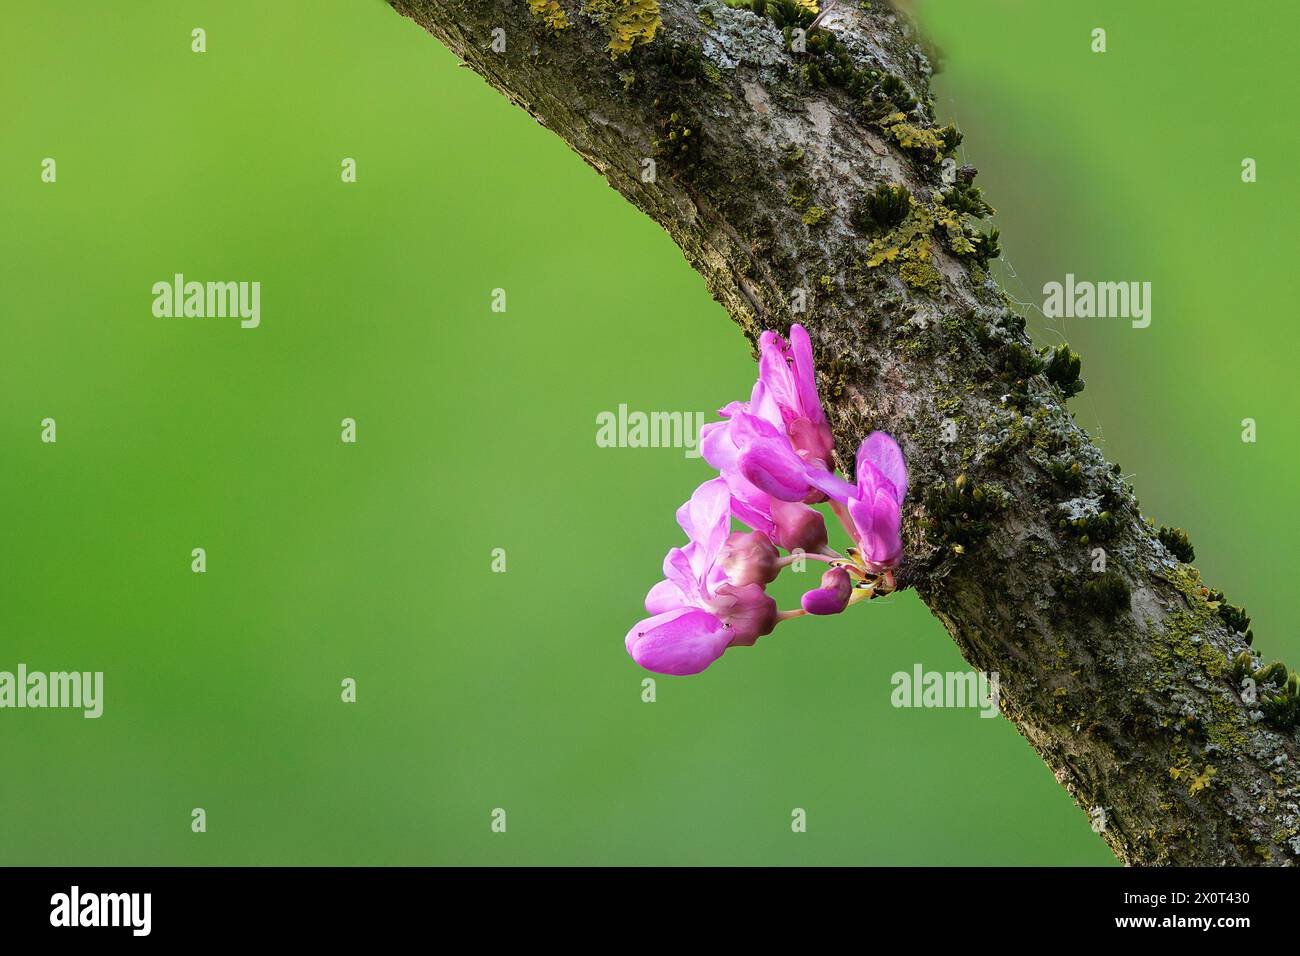 japanese cherry flower from tree trunk, focus stack from multiple images Stock Photo